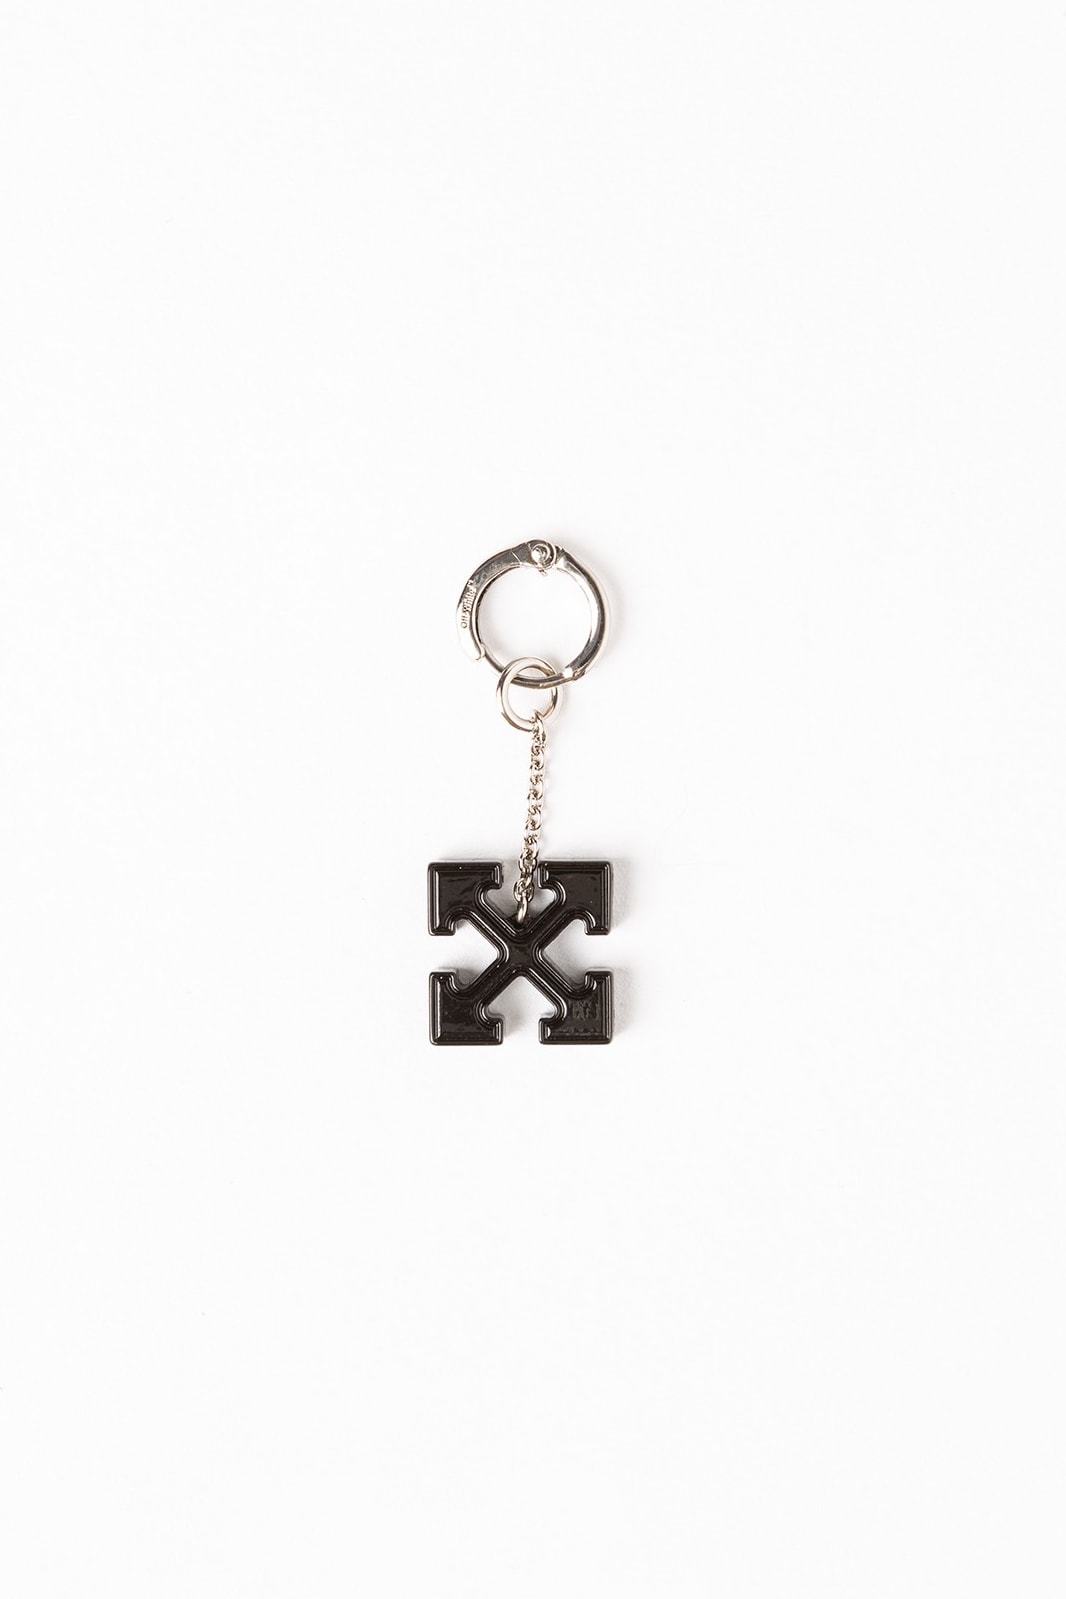 Off White Jewelry Collection Arrows Keychain Silver Black